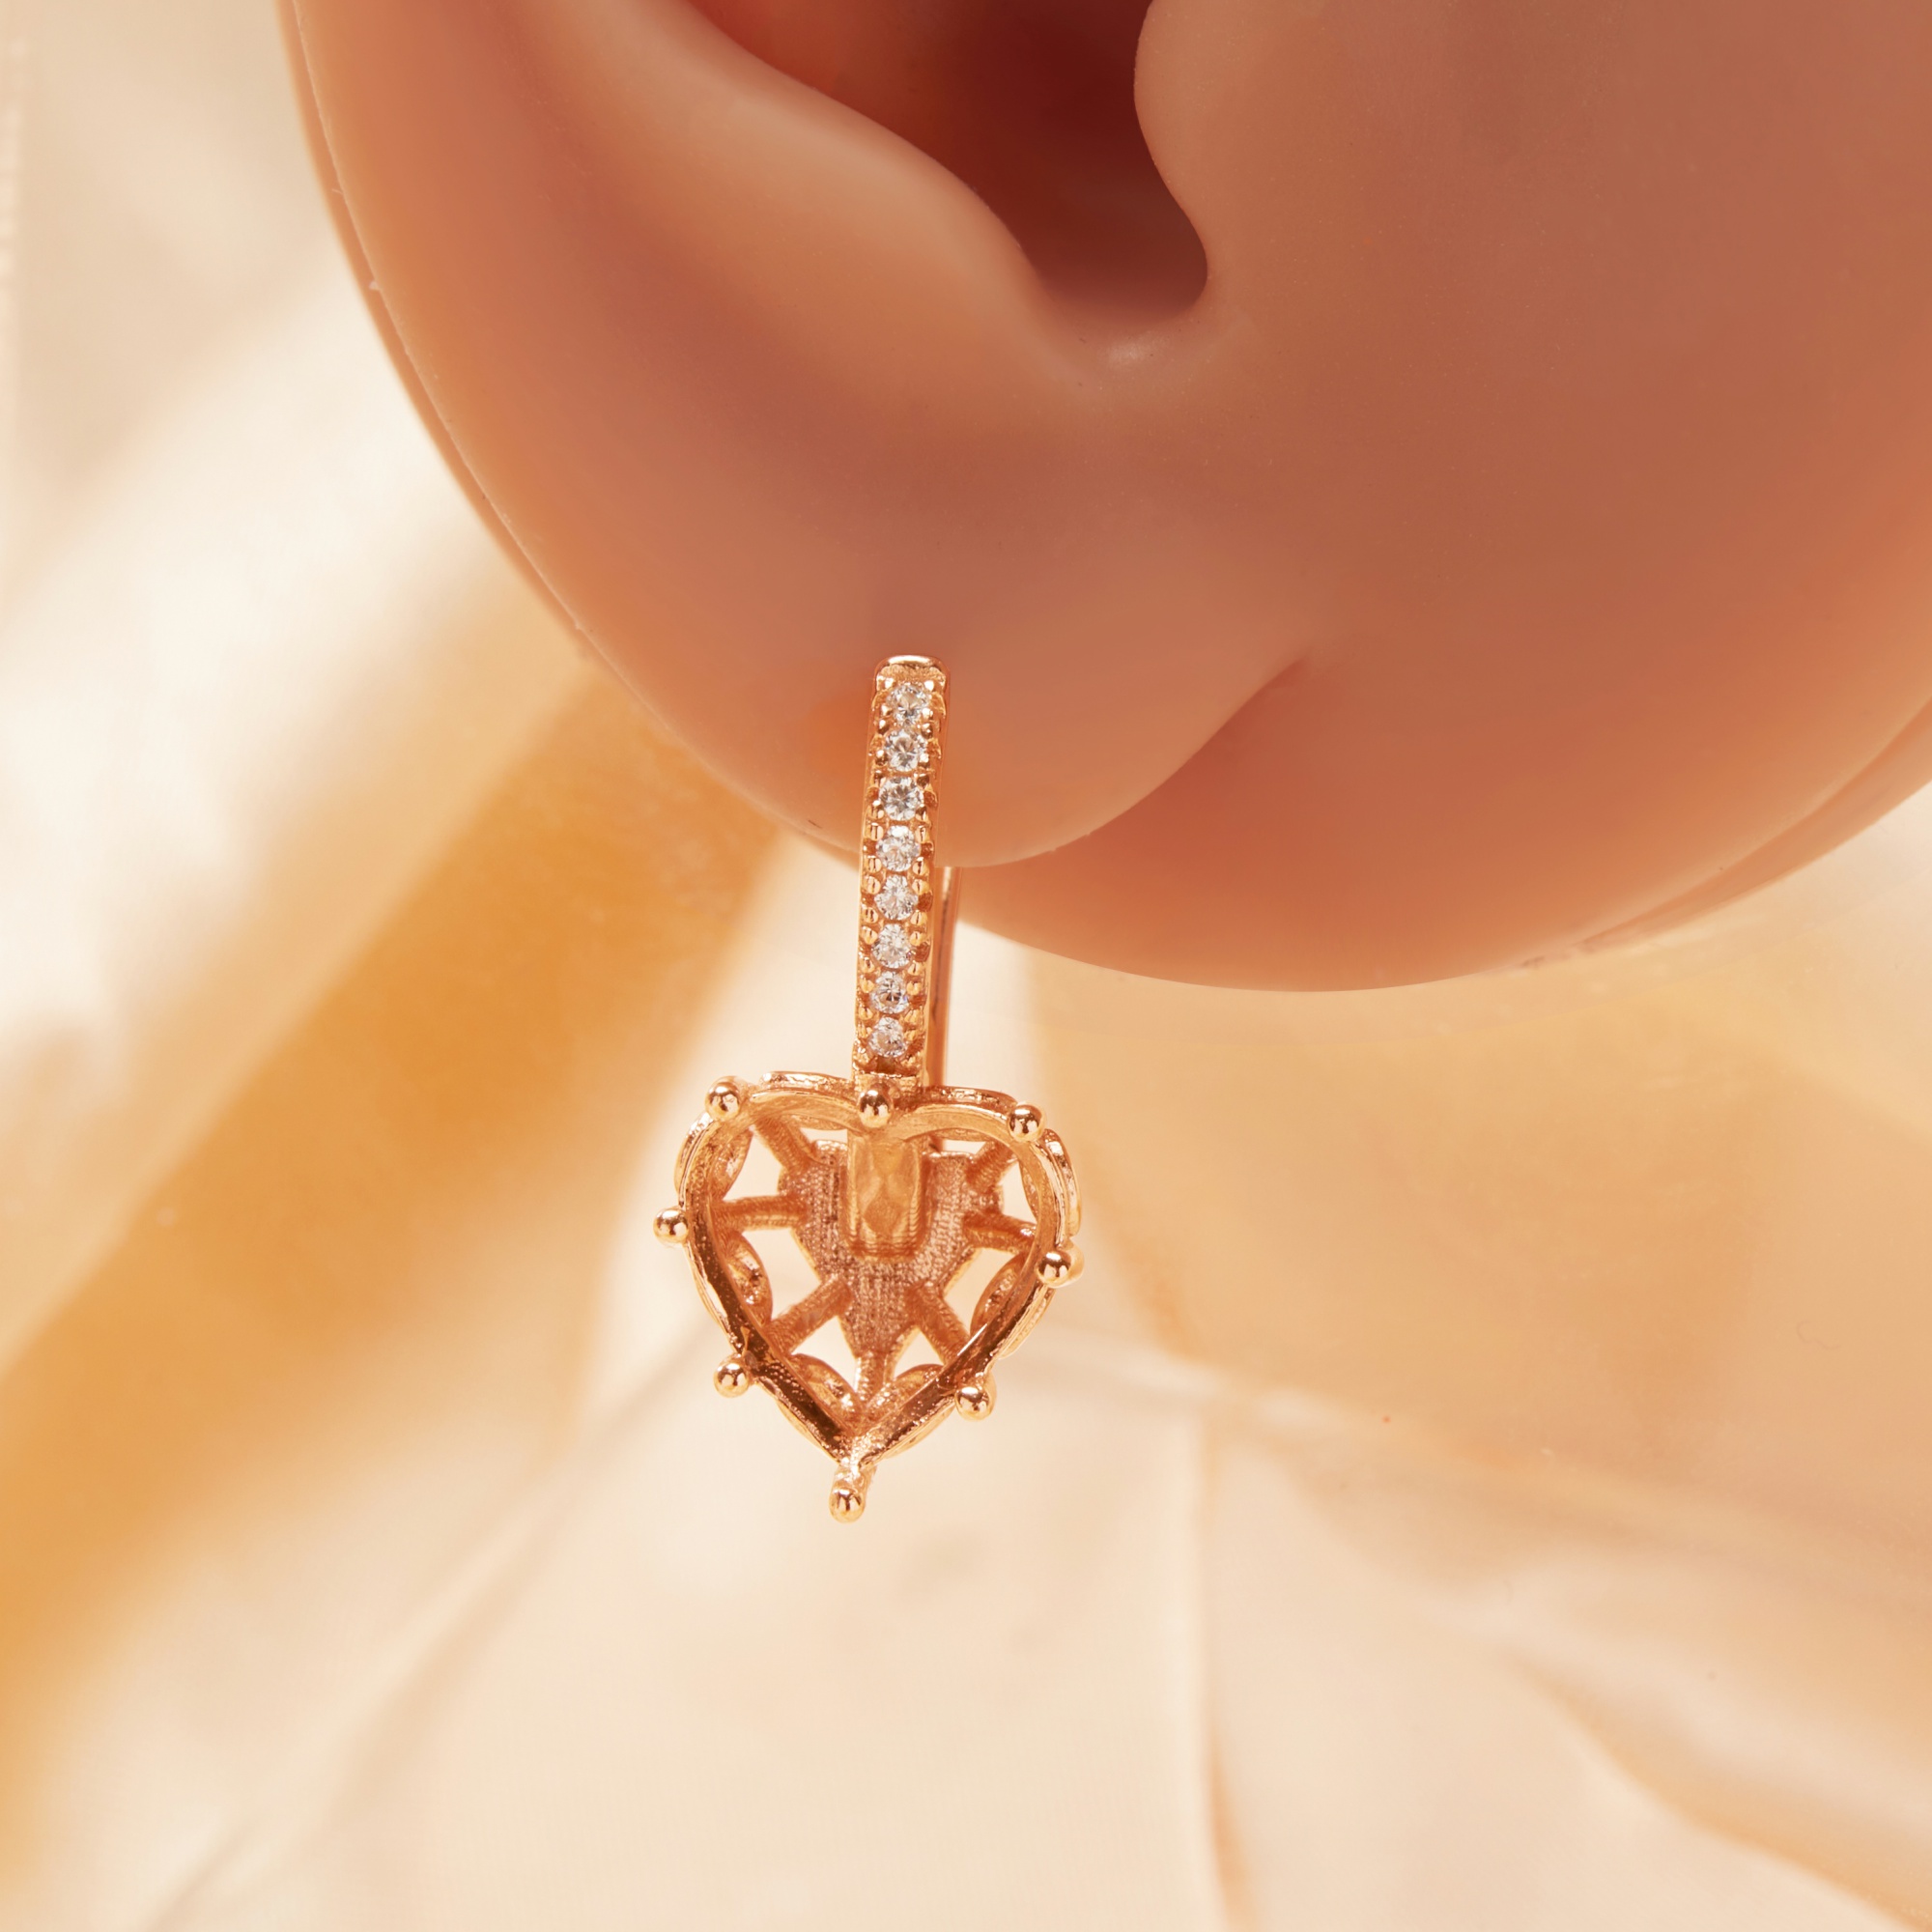 10MM Heart Prong Hoop Earrings Settings,Solid 925 Sterling Silver Rose Gold Plated Earrings,DIY Earring Supplies For Gemstone 1706143 - Click Image to Close